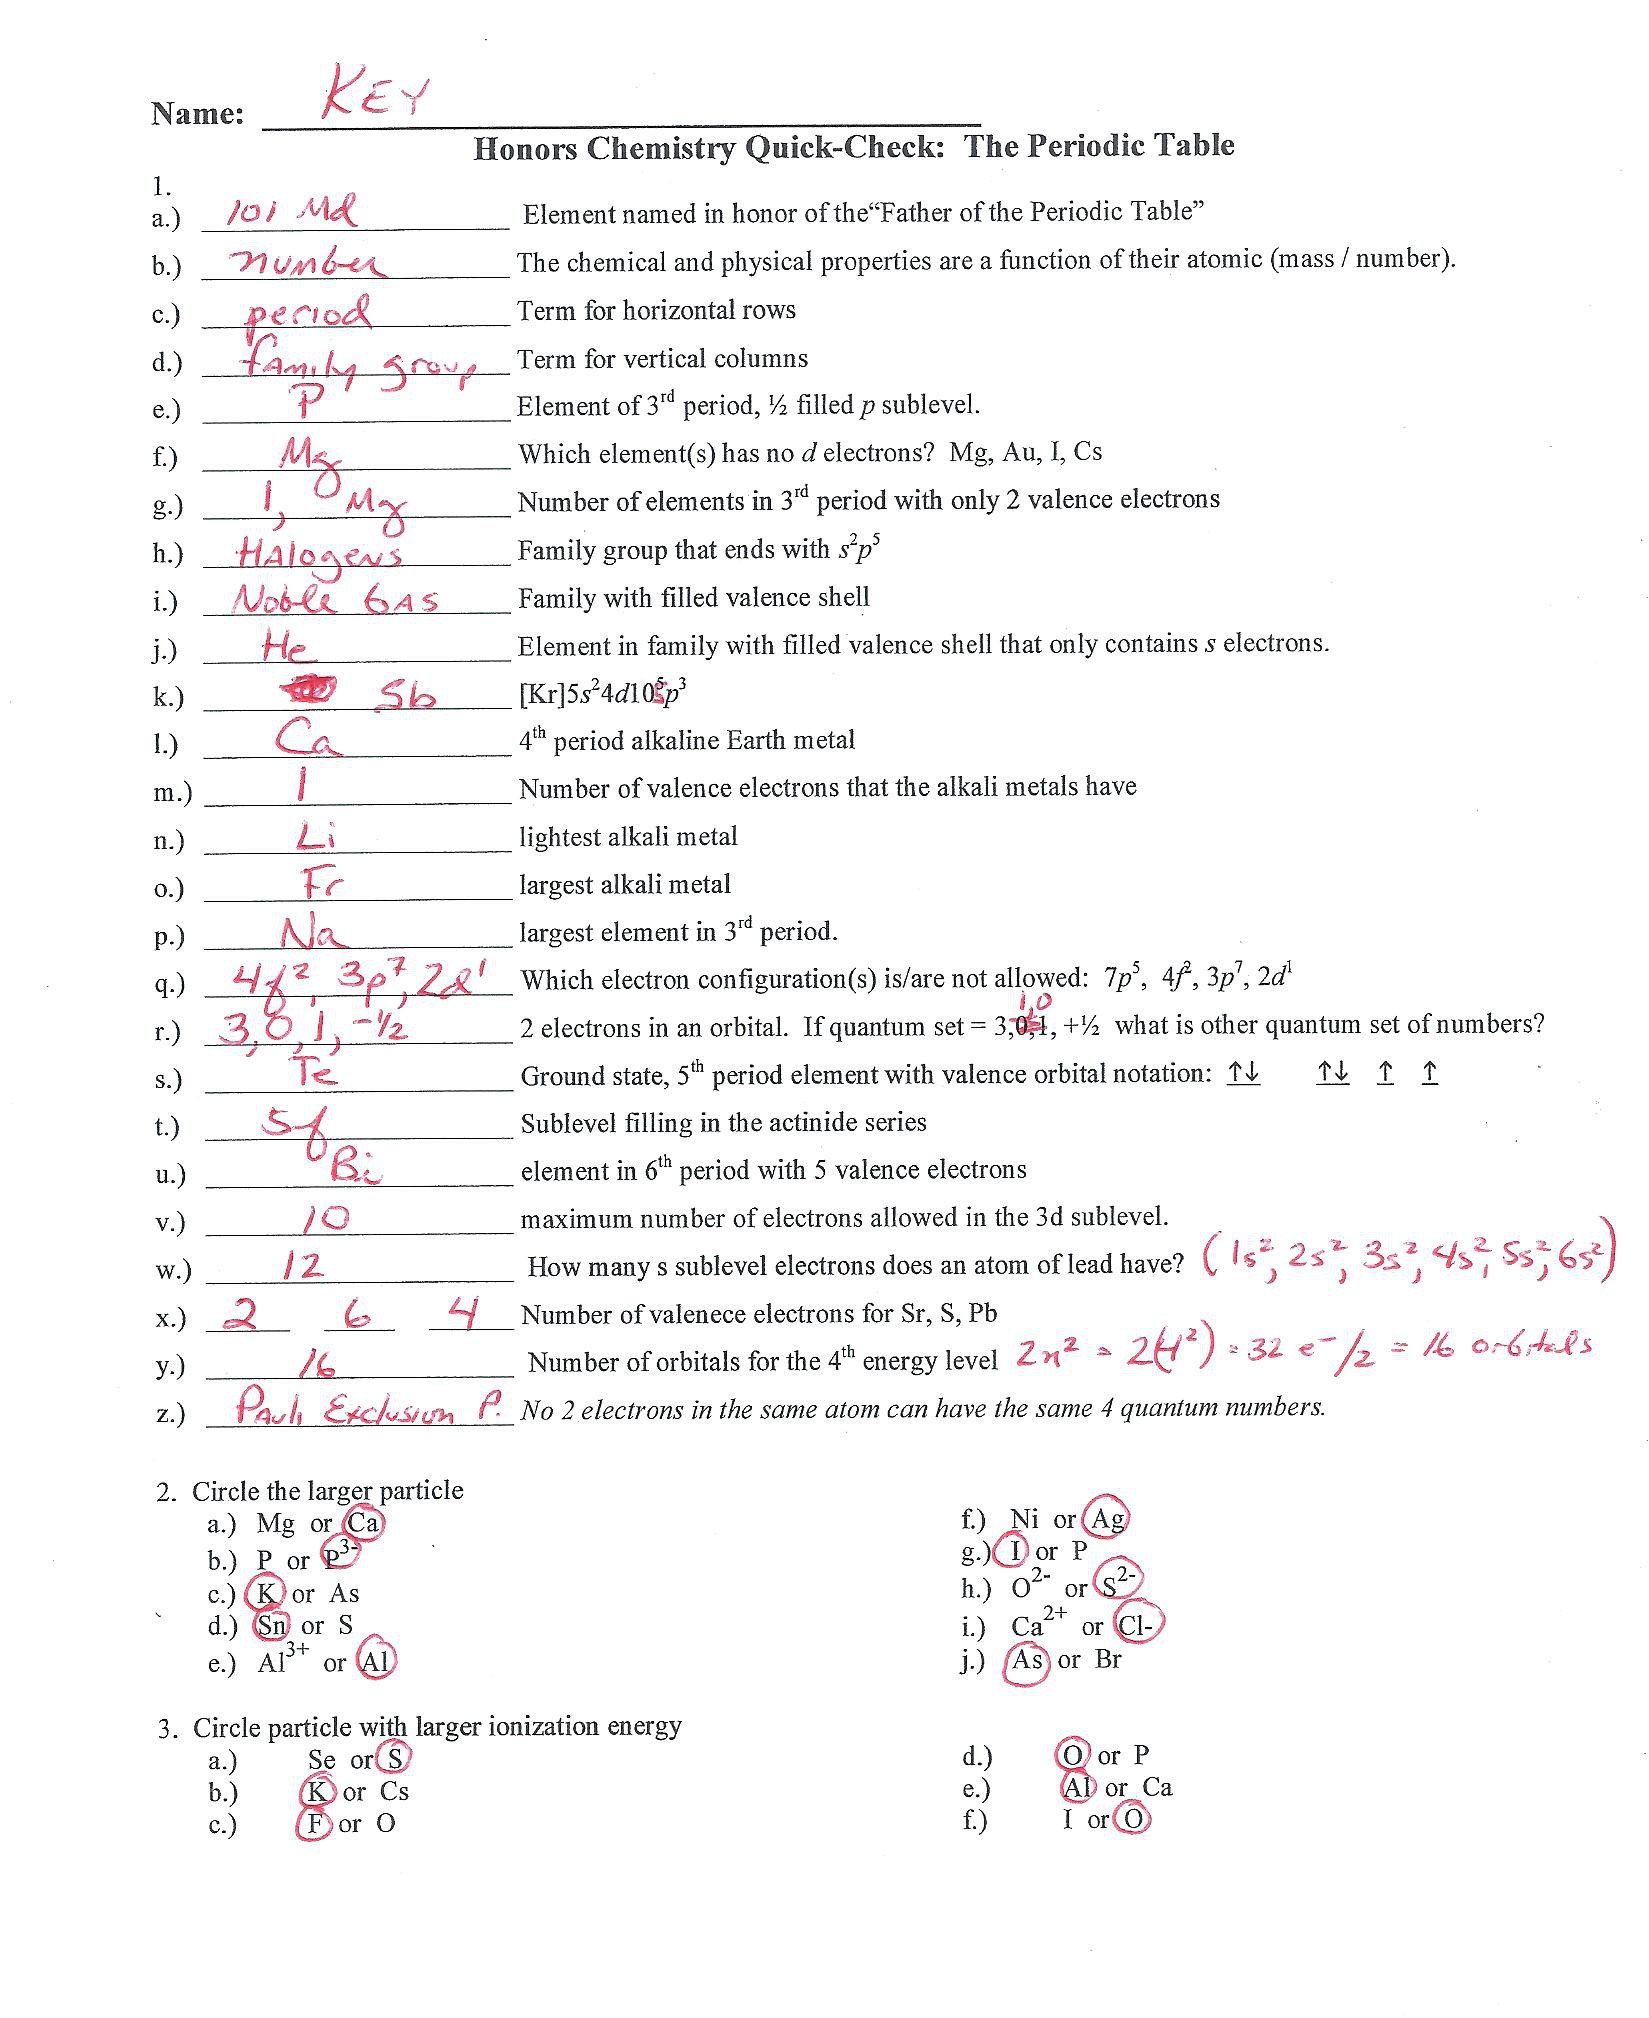 Periodically Puzzling Worksheet Answers